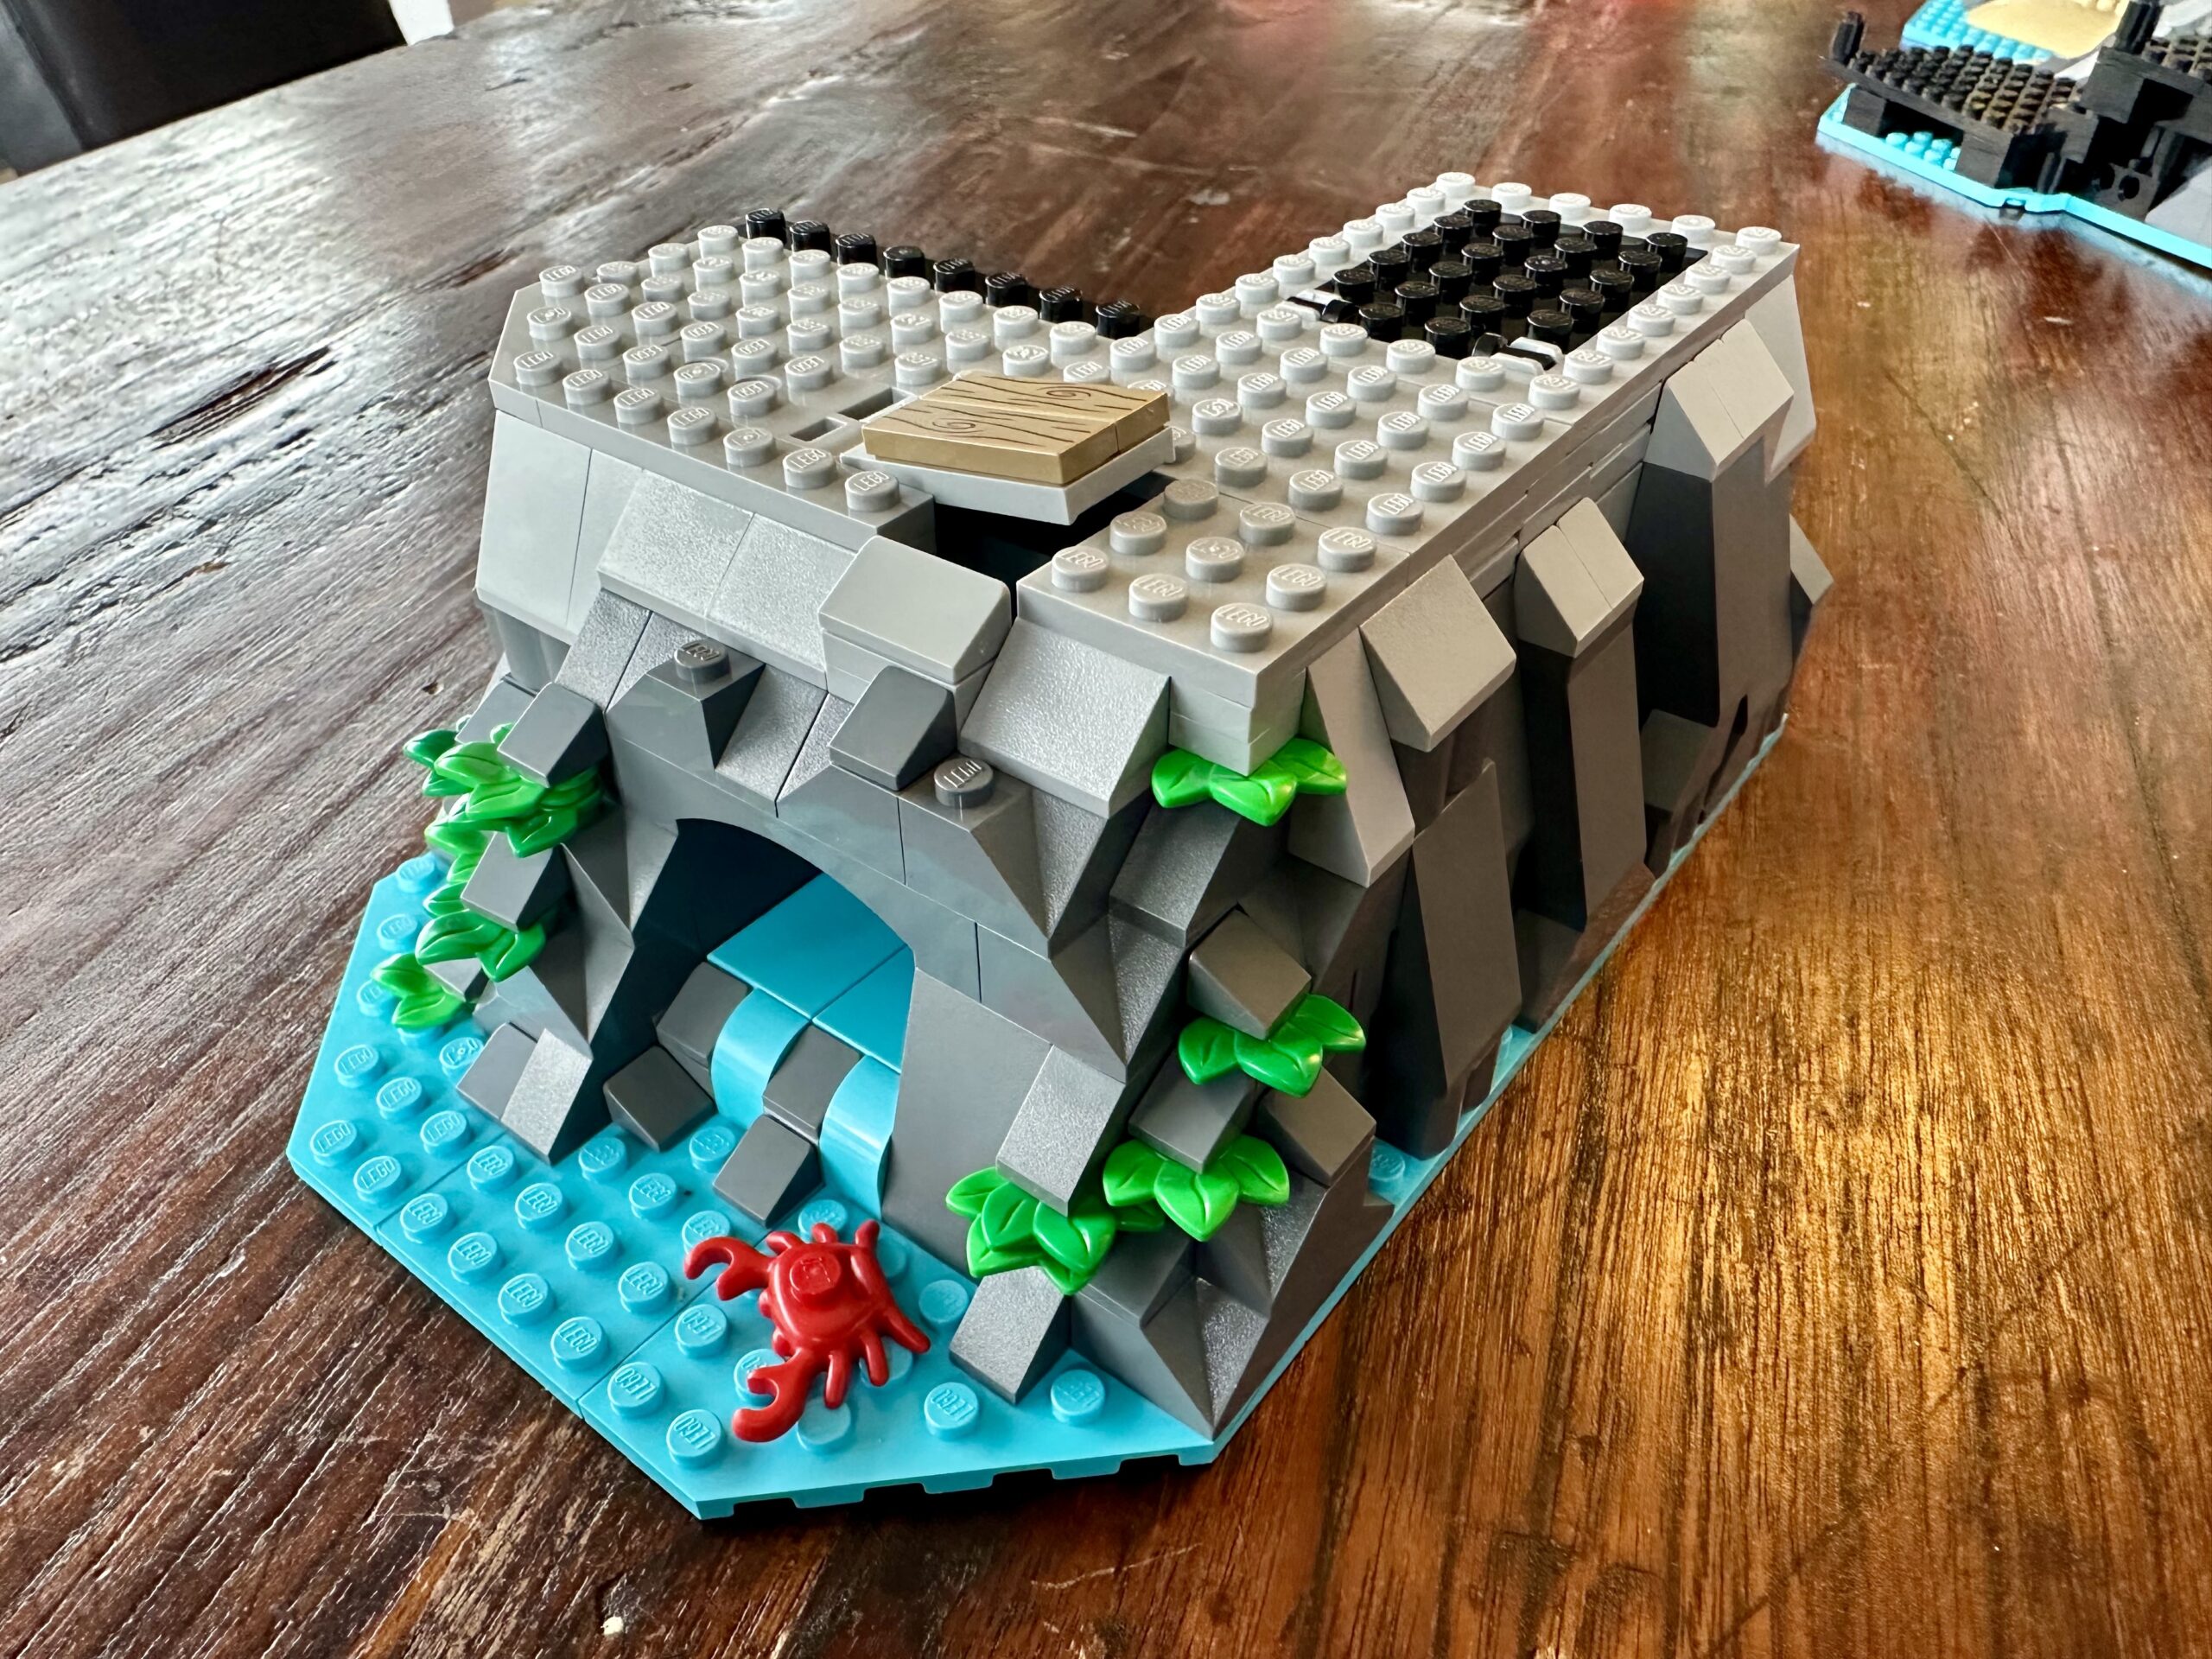 LEGO build of set 10320 Eldorado Fortress in progress. An L-shaped section of dark and light gray cliffs speckled with green foliage. Some water flows out from a cave to the turquoise waters of the beach. A red crab is in the water.